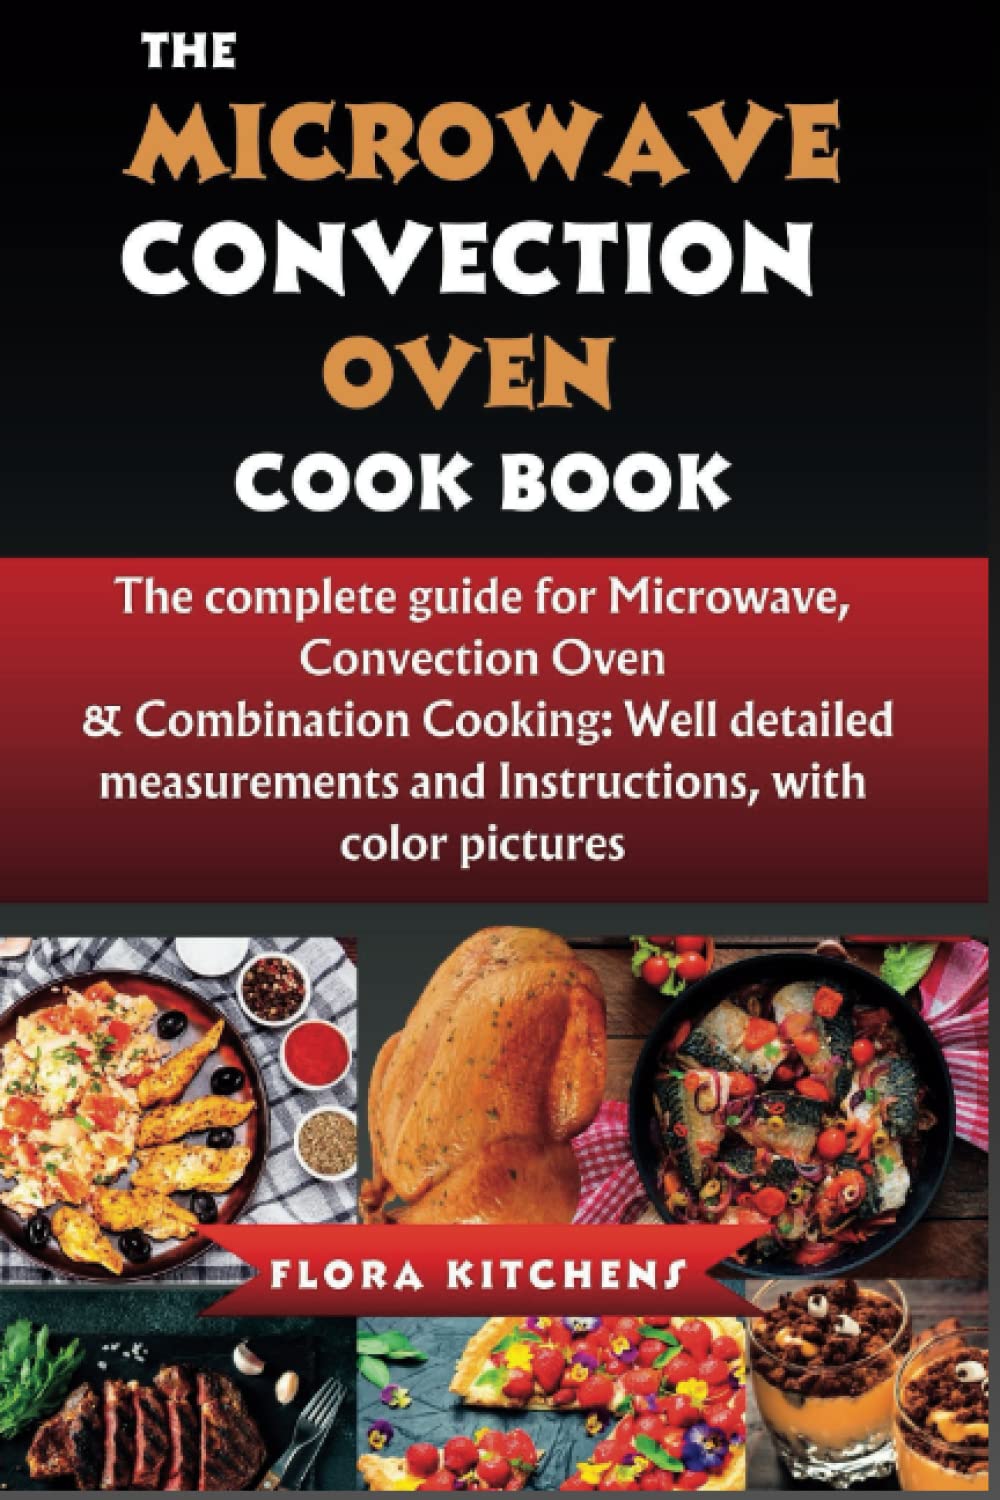 The Microwave Convection Oven Cookbook: The complete guide for Microwave, Convection Oven & Combination Cooking: Well-detailed measurements and ... Cooking Fun, Cookbooks by Flora Kitchens)